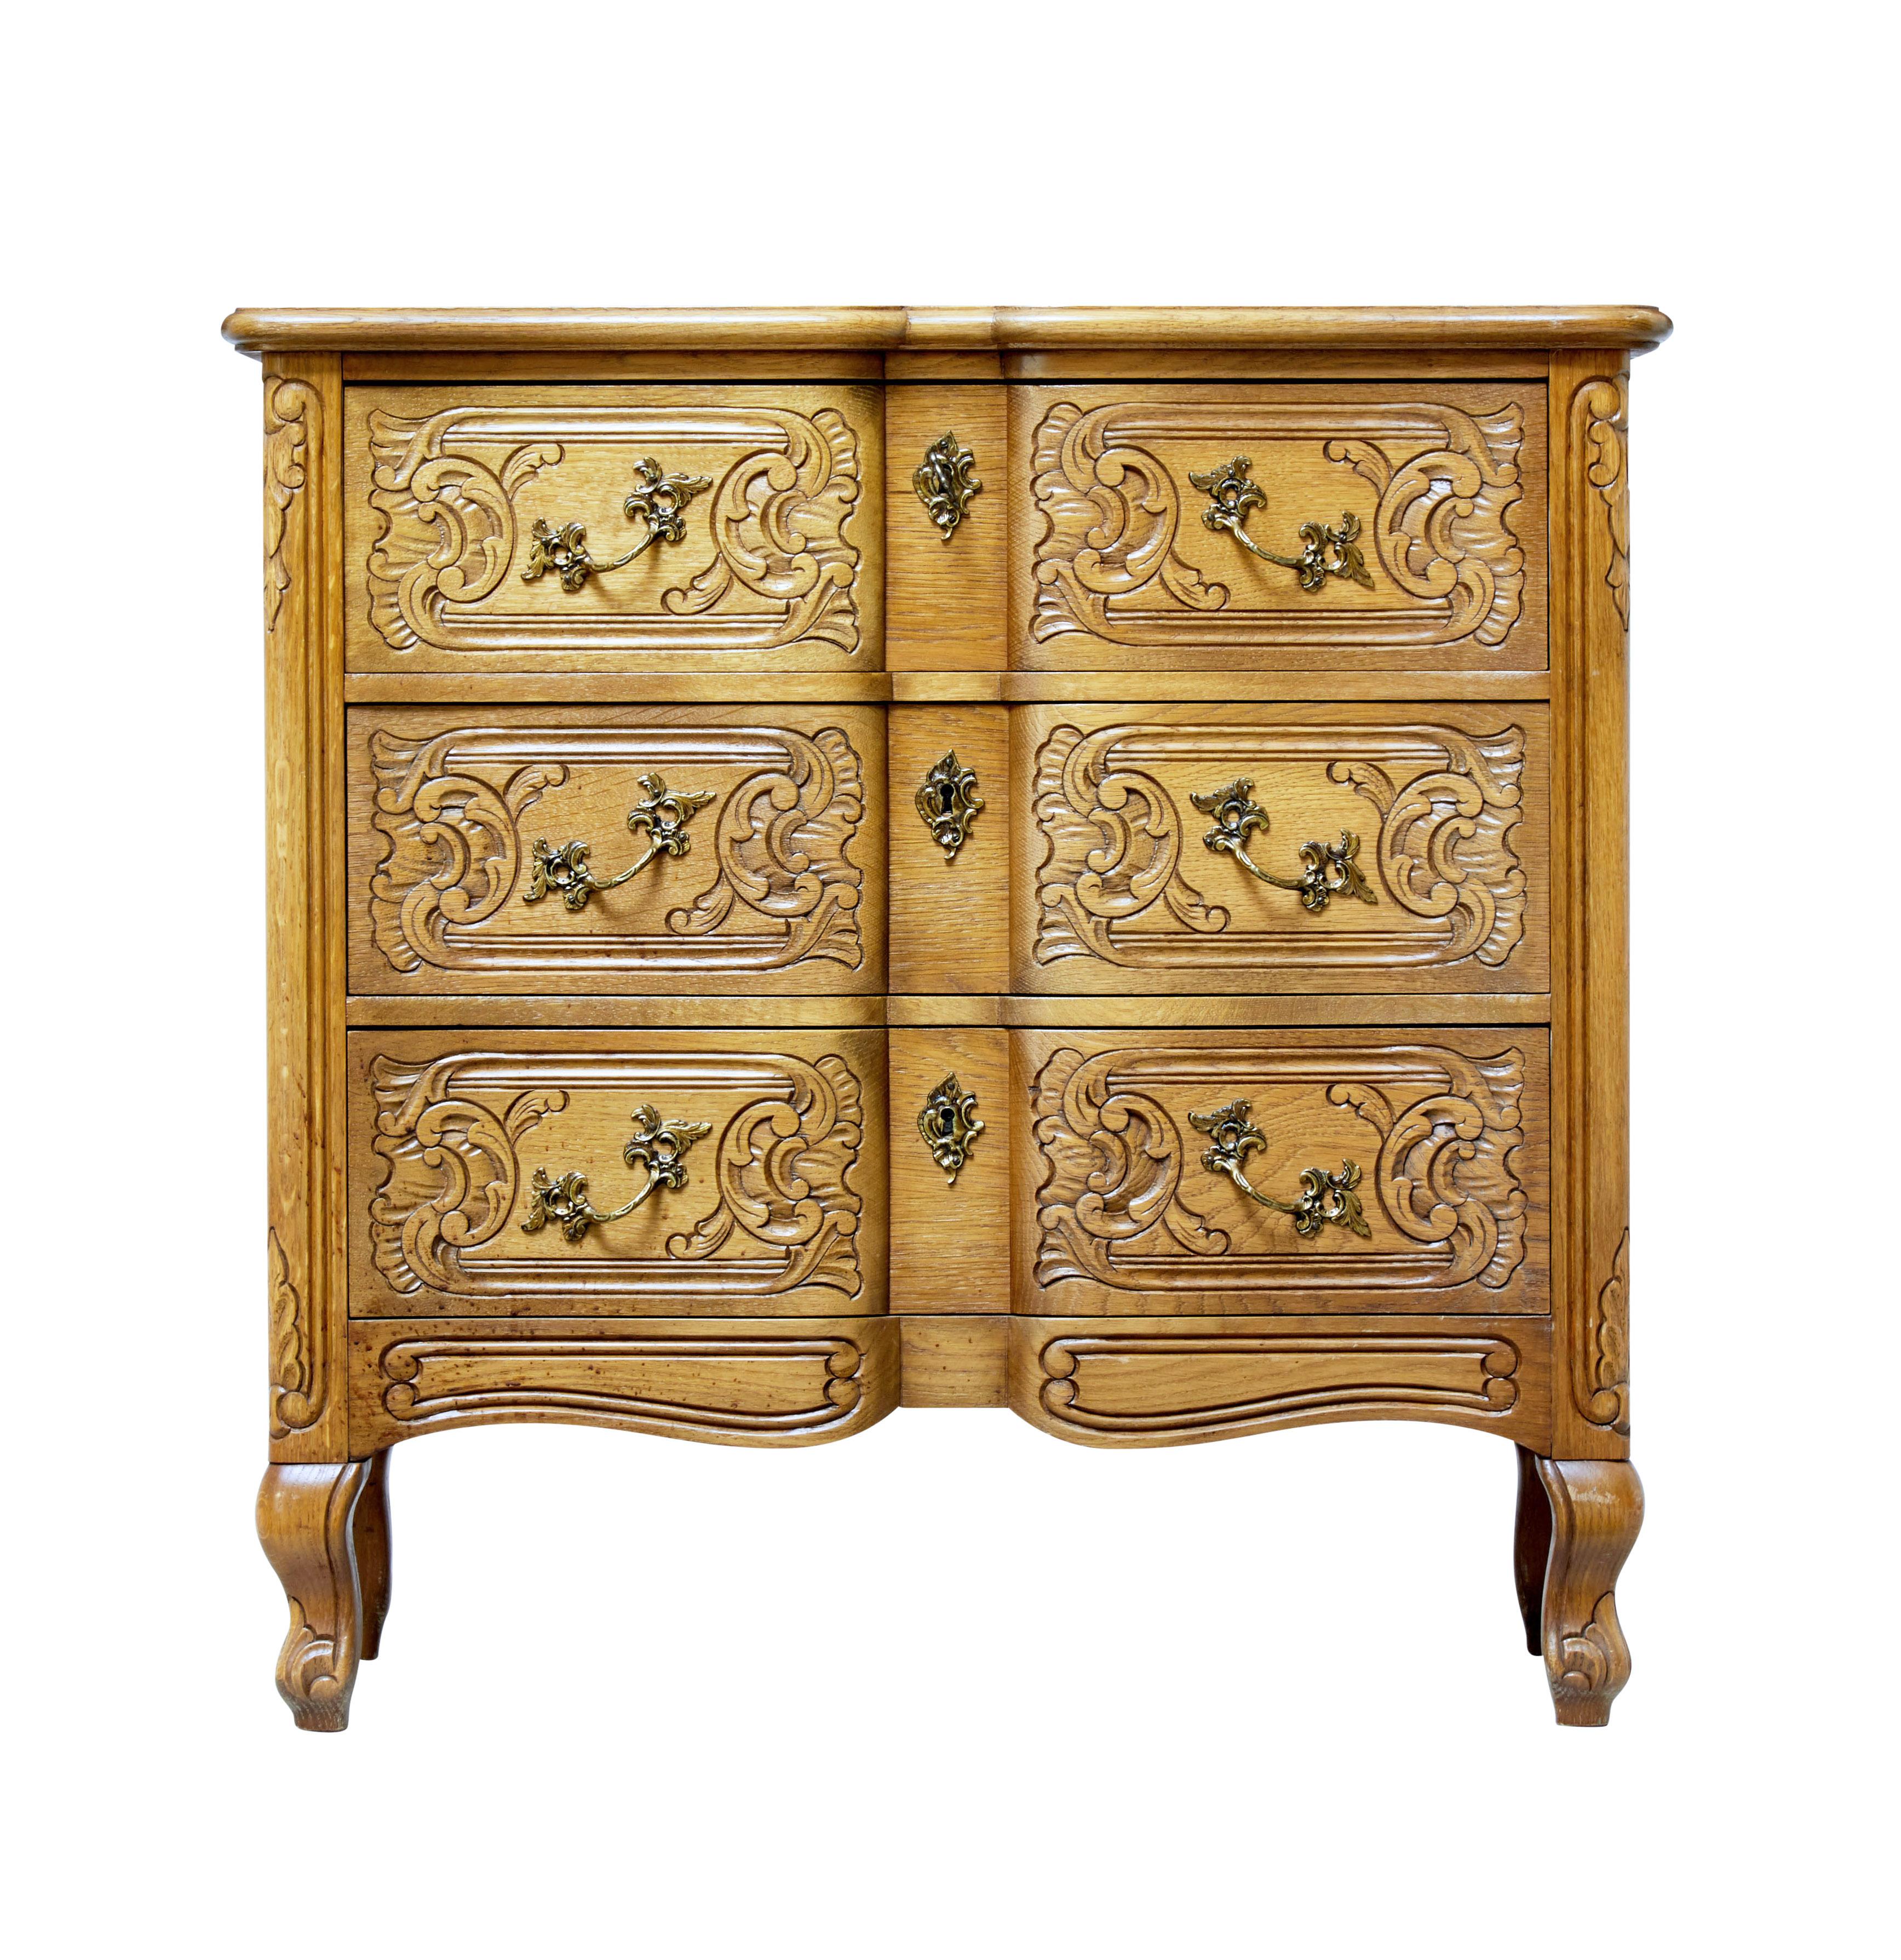 Carved oak commode of small proportions, circa 1950.

Practical small chest of drawers in the Baroque taste. 3 block fronted drawers with carving in the solid. With decorative handles.

Light oak color.

Restoration to veneer on back edge,